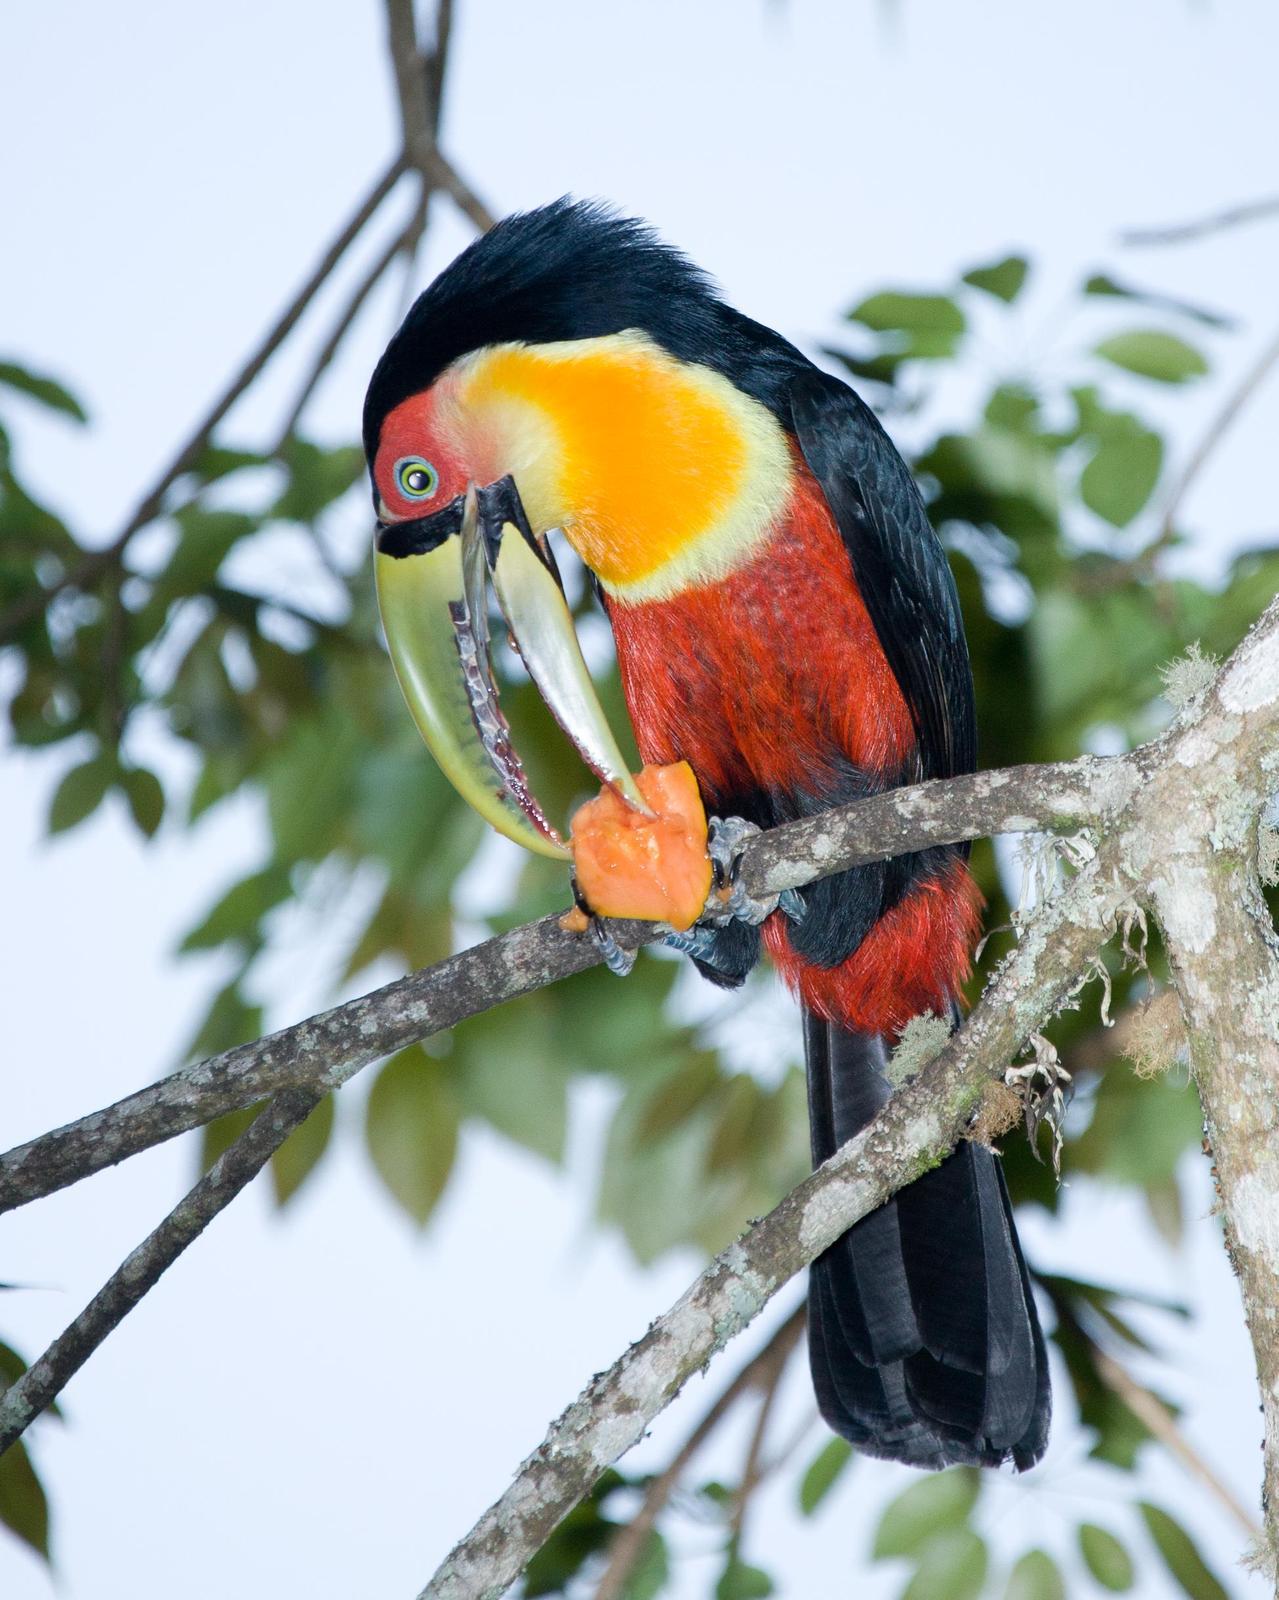 Red-breasted Toucan Photo by Robert Lewis